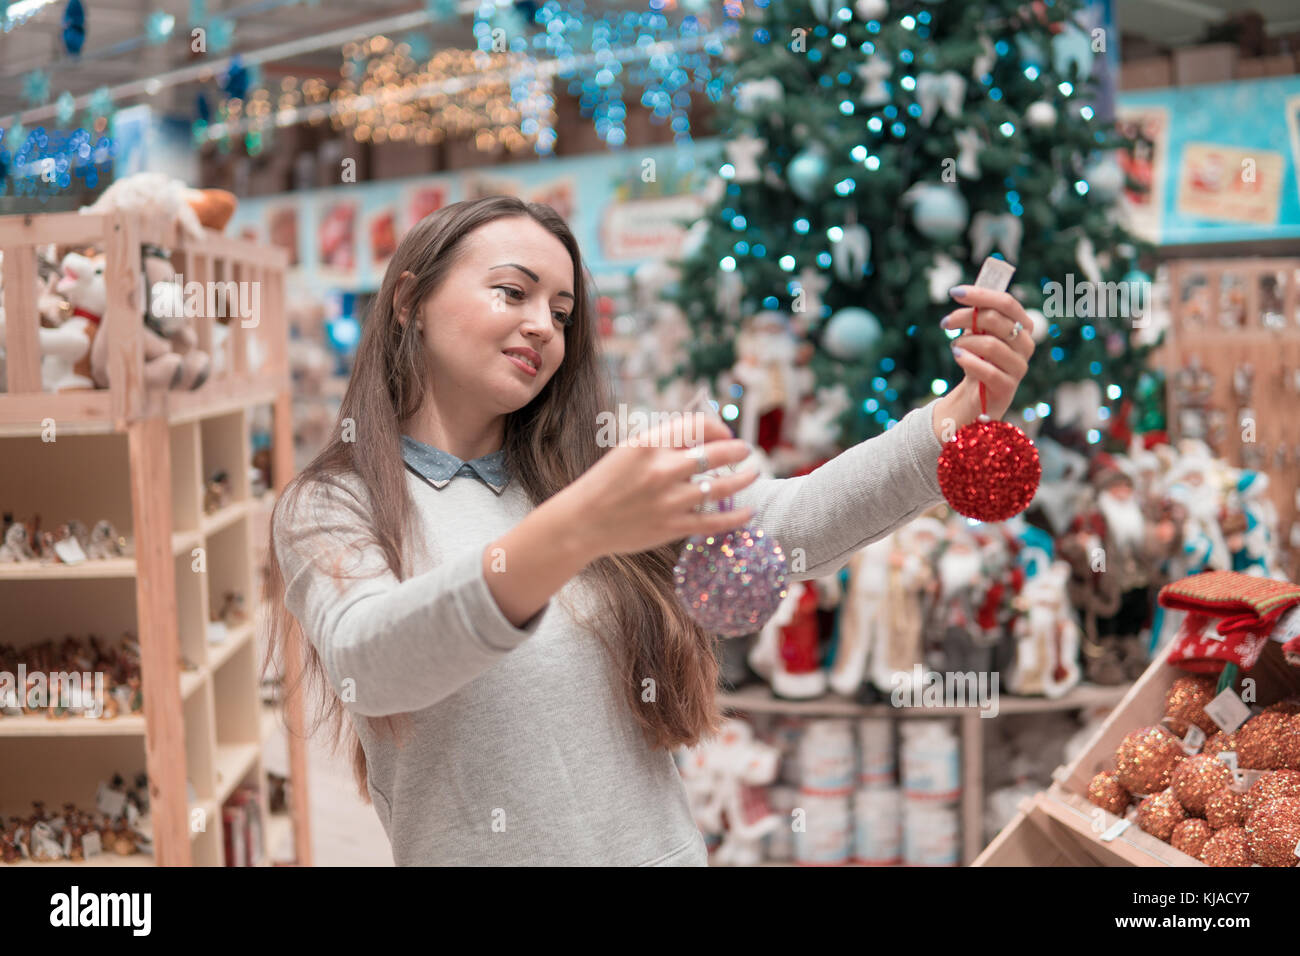 customer girl choosing gifts for Christmas and New Year Stock Photo